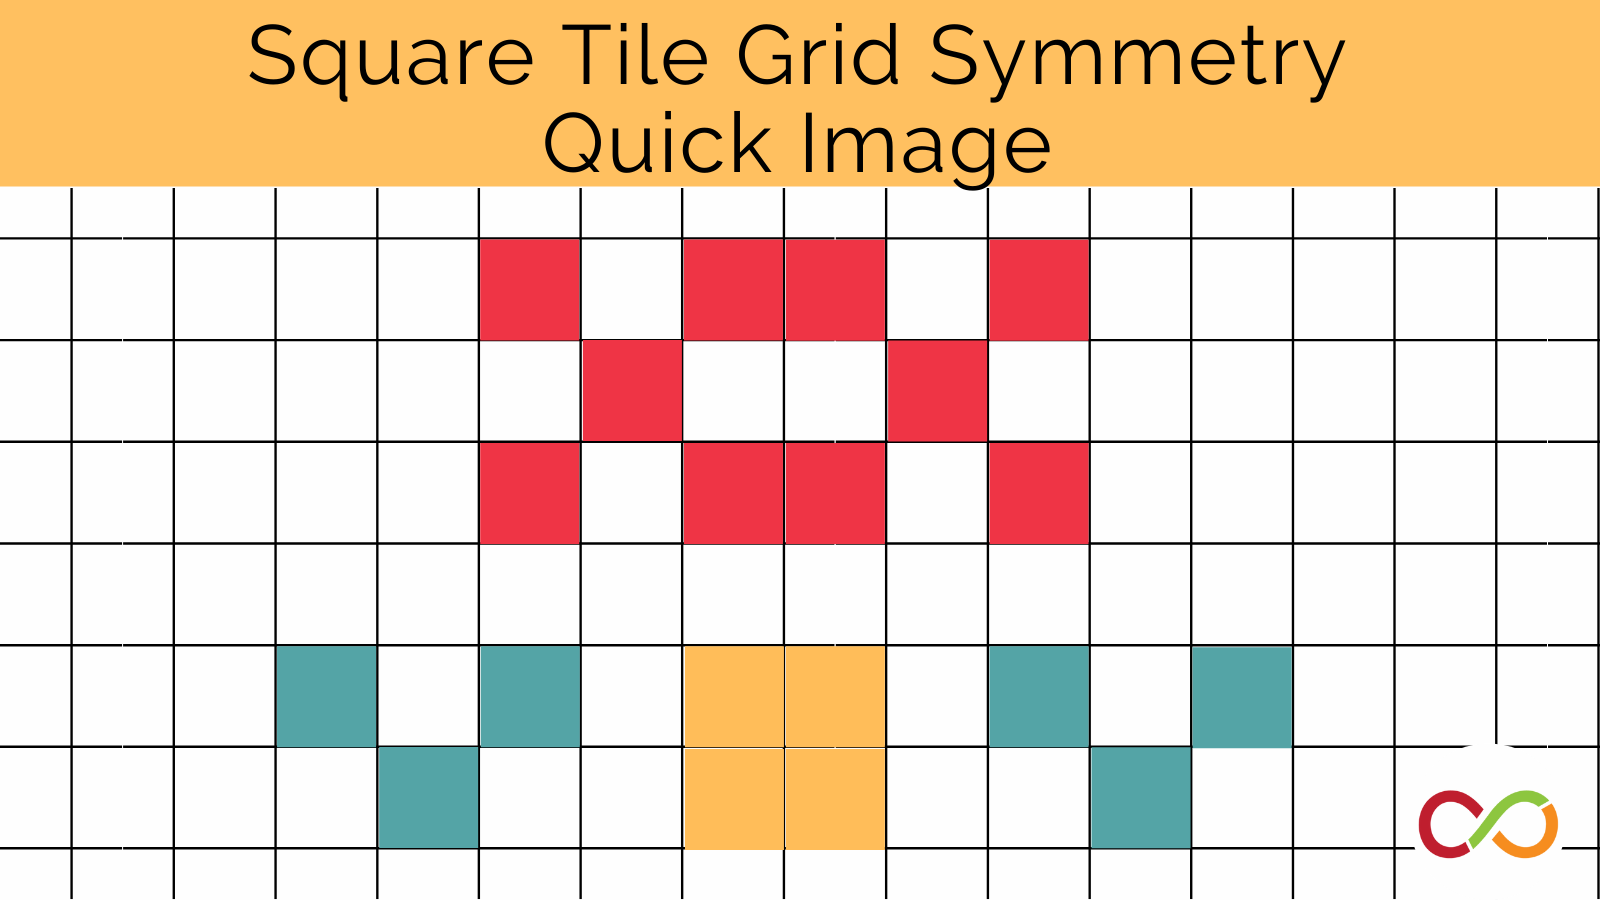 An image linking to the Square Tile Grid Symmetry Quick Image lesson